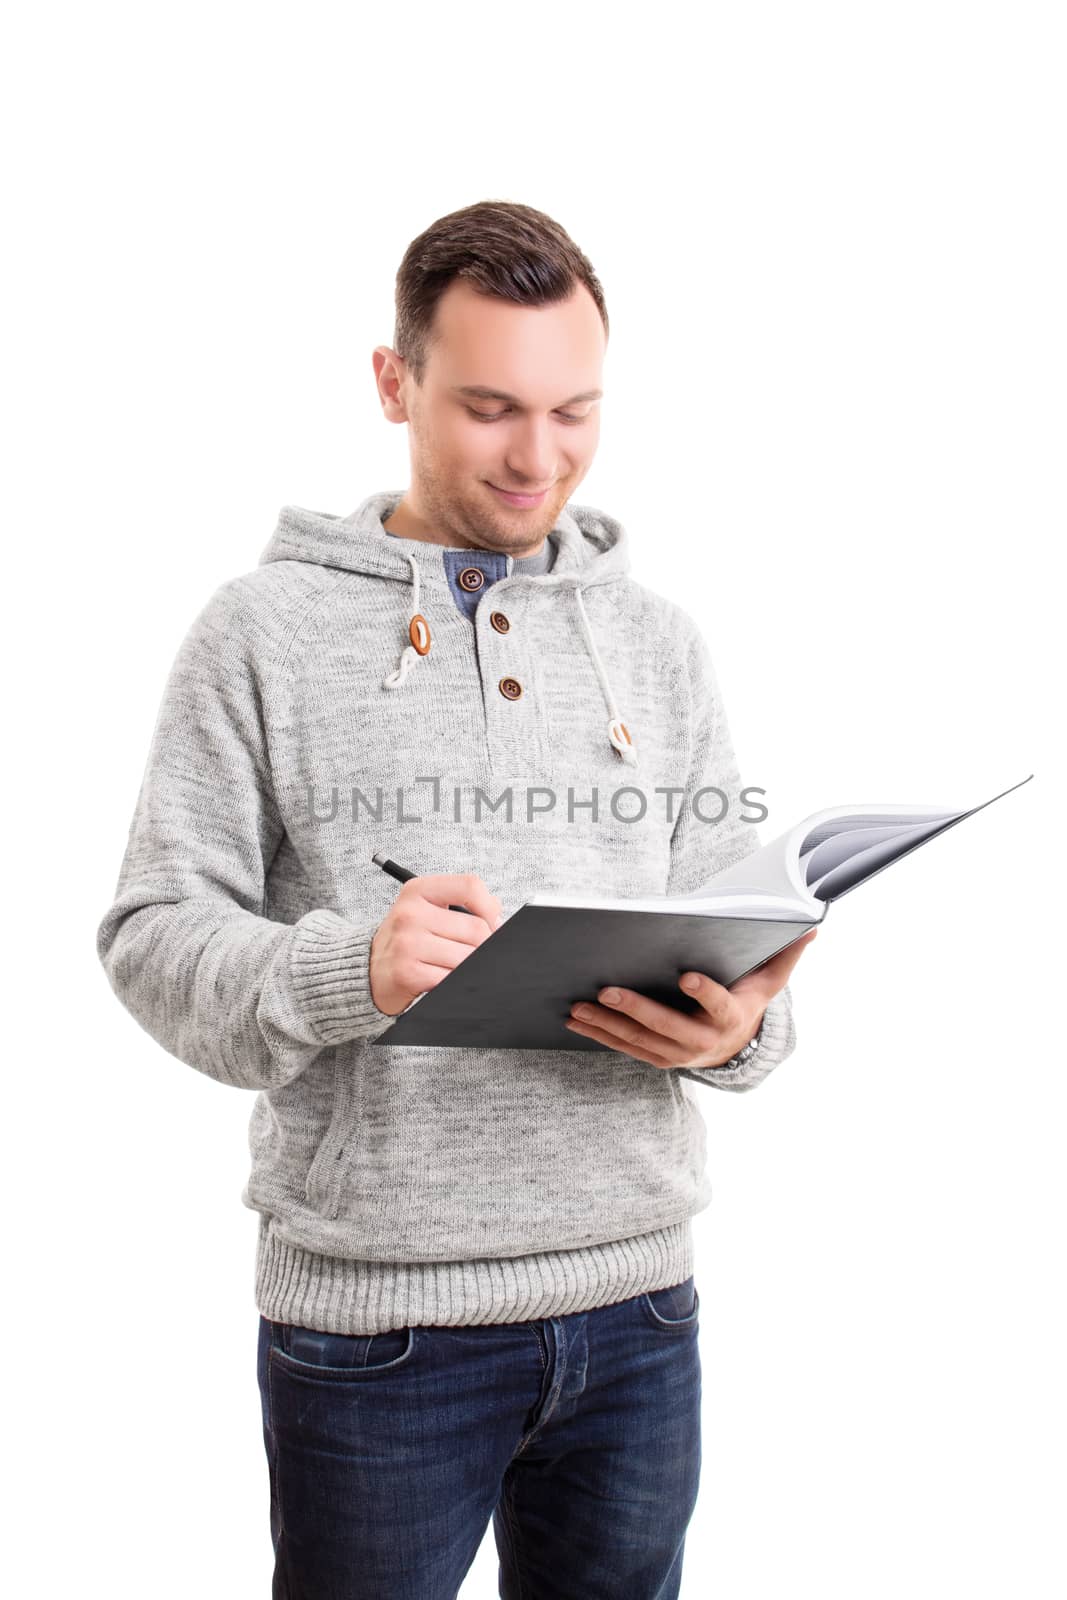 Young man writing in a notebook by Mendelex